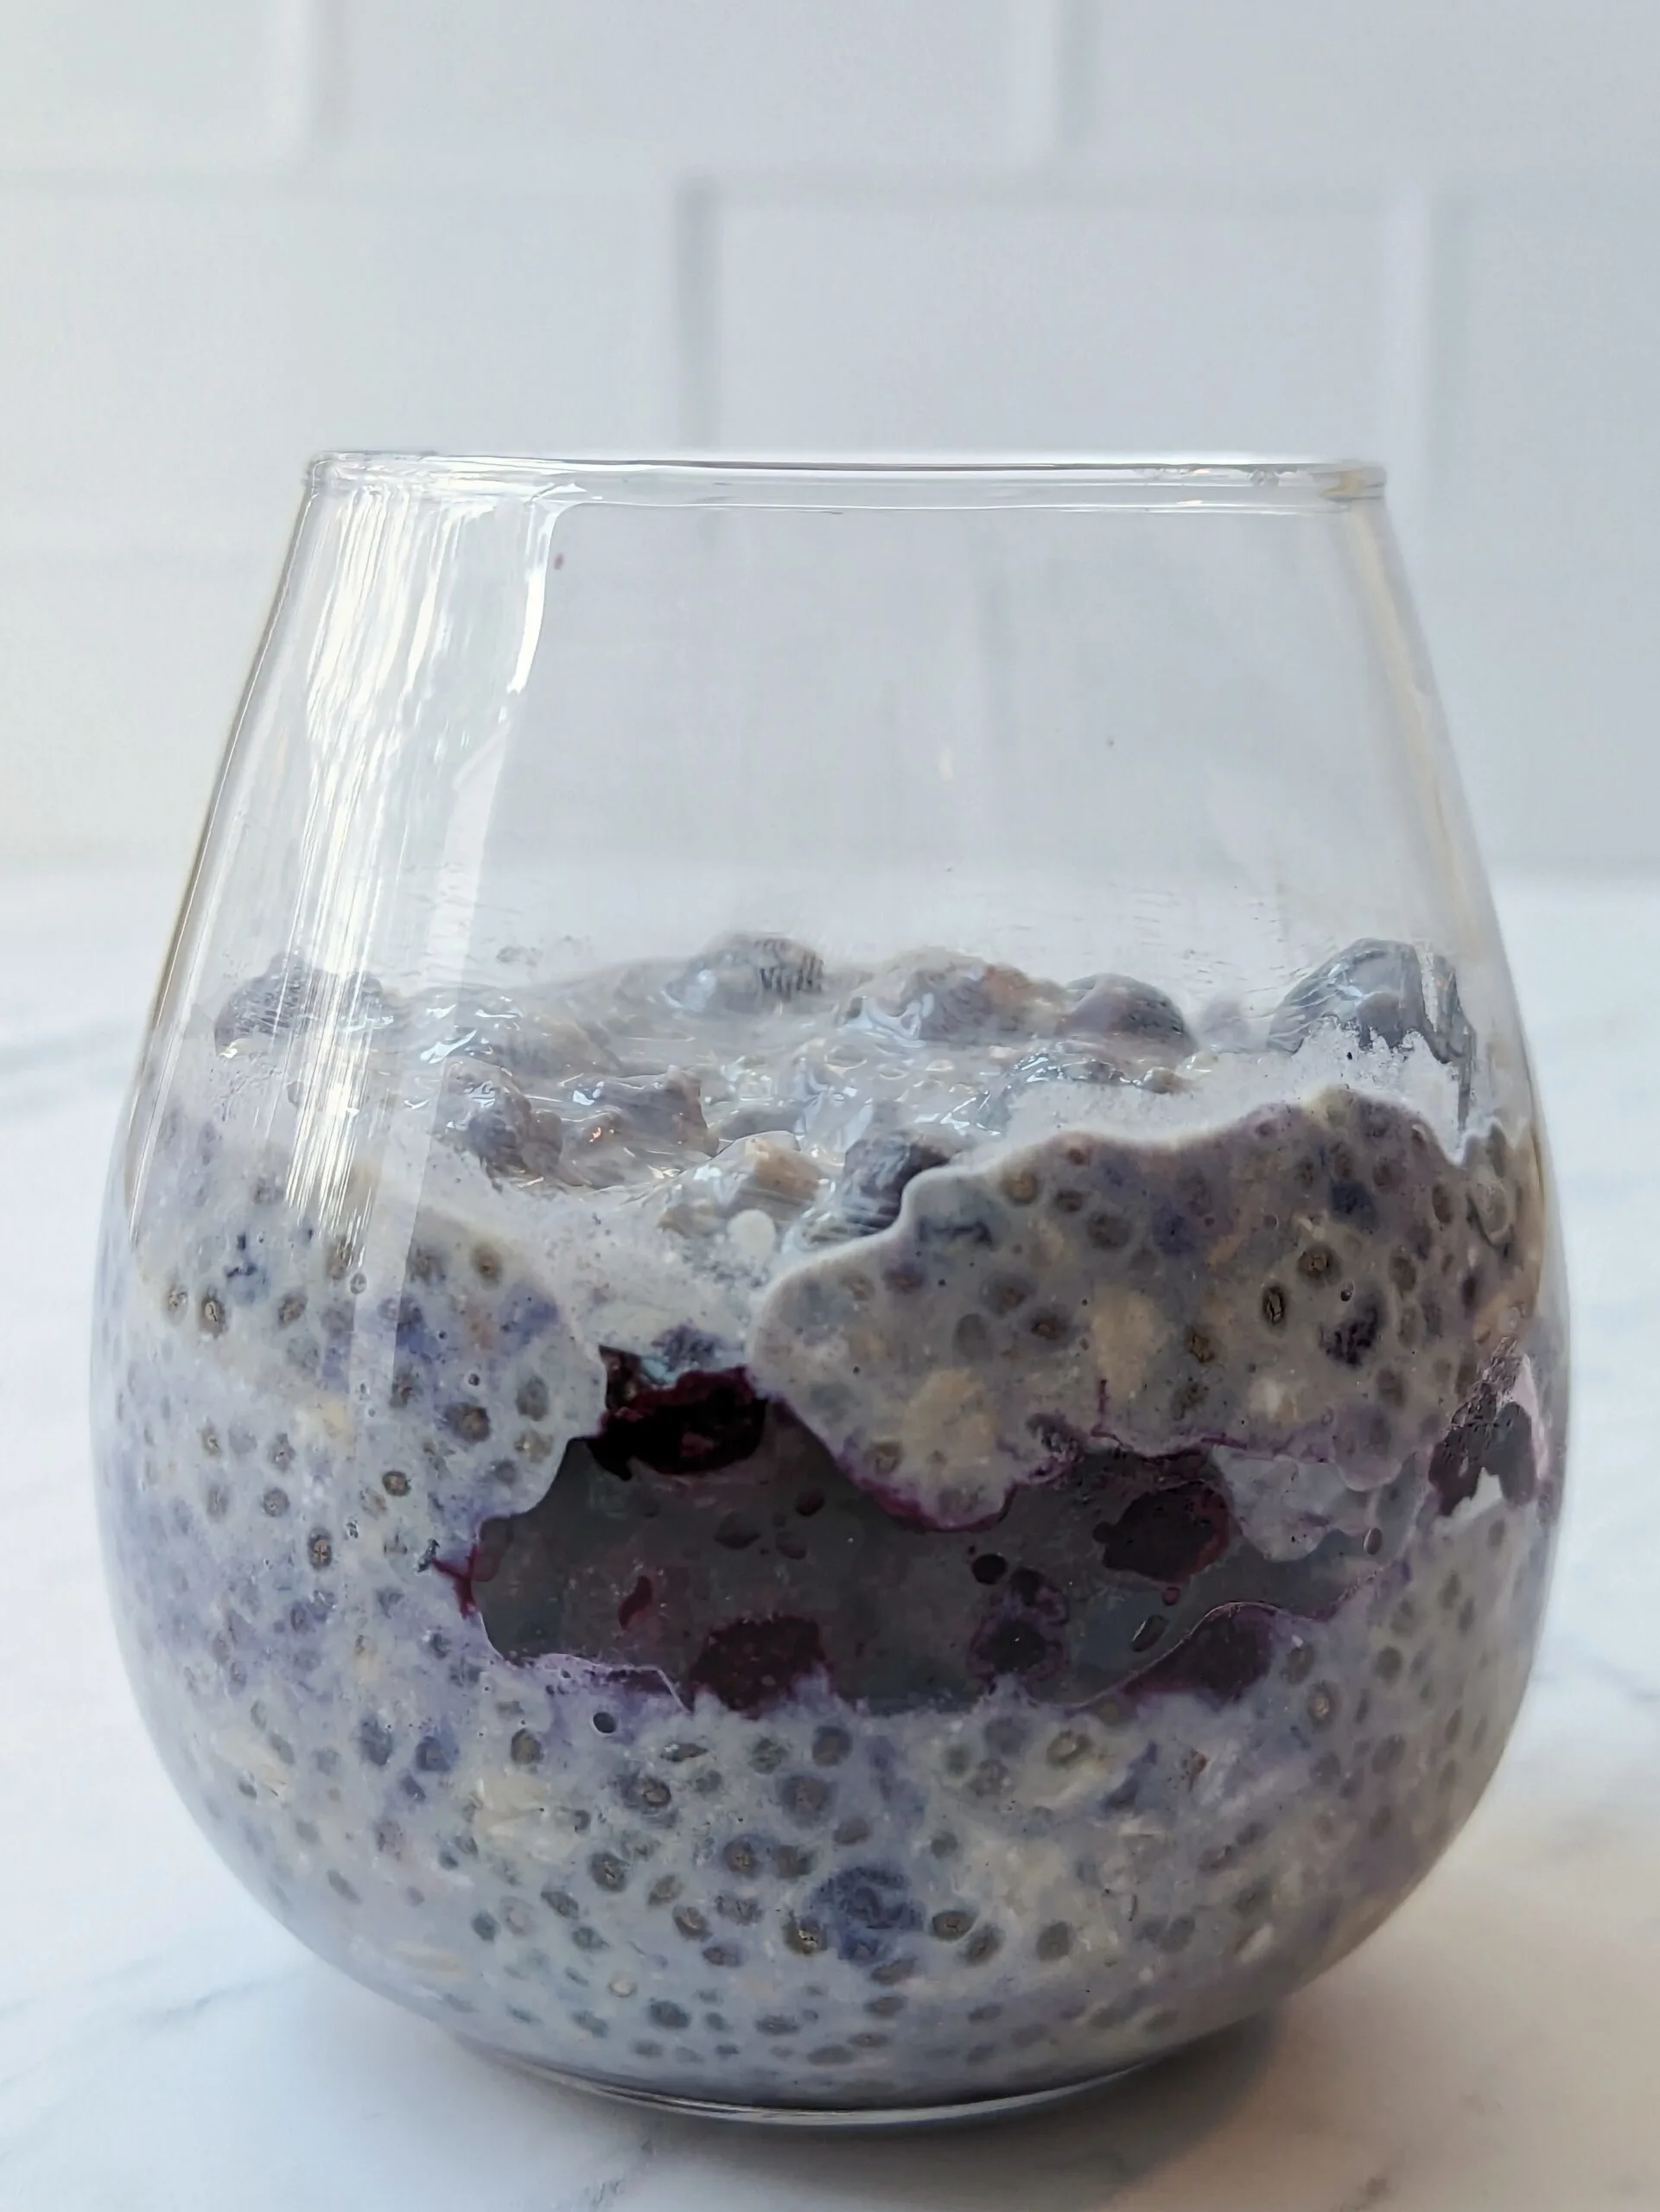 A side view of overnight oats with frozen fruit.